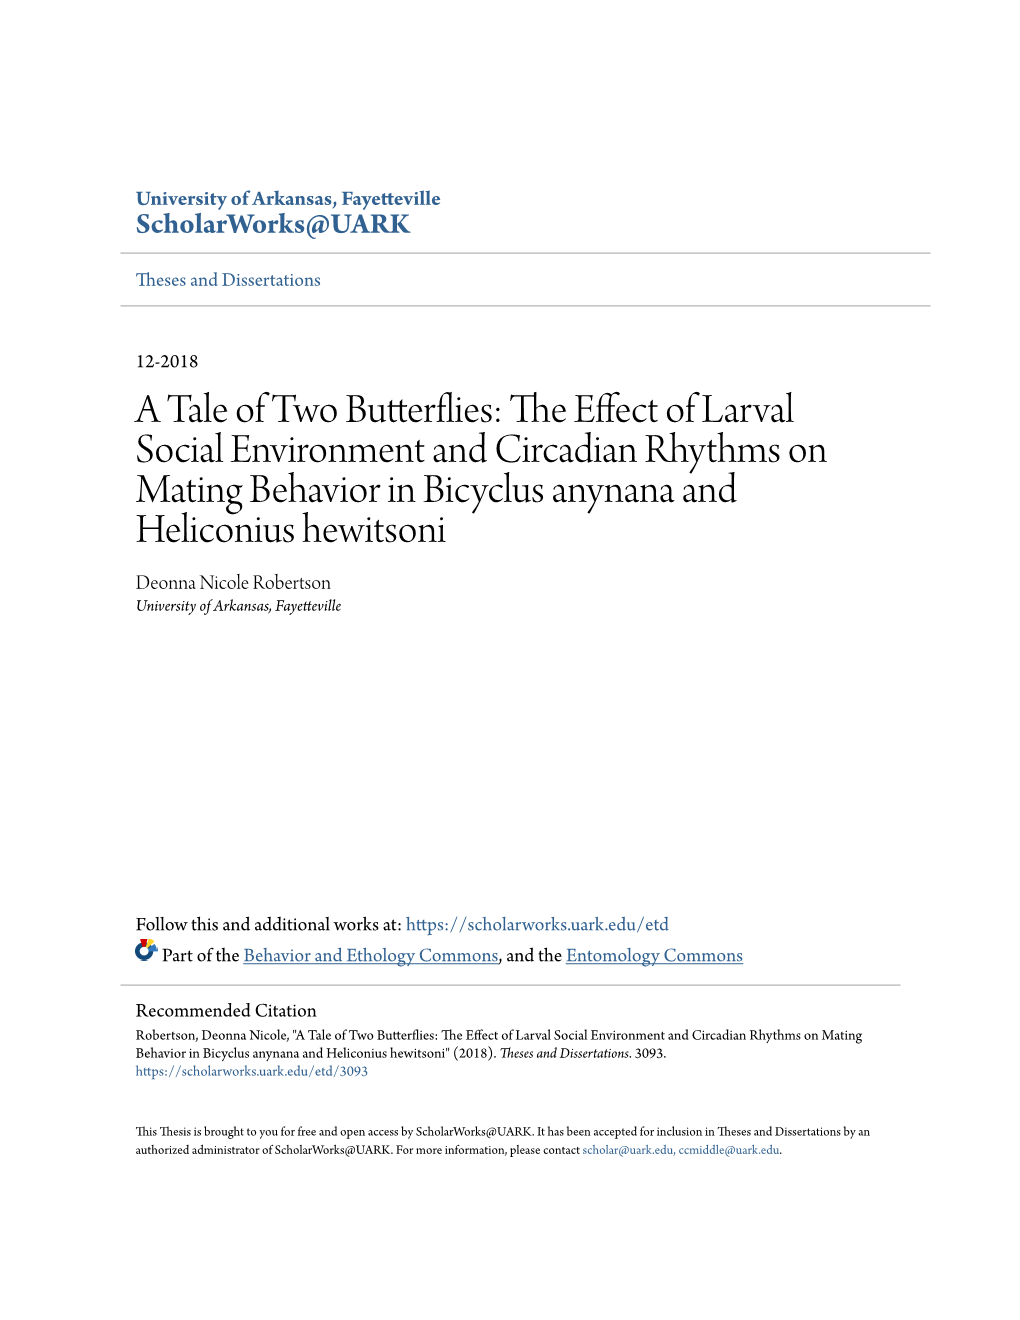 The Effect of Larval Social Environment and Circadian Rhythms on Mating Behavior in Bicyclus Anynana and Heliconius Hewitsoni" (2018)